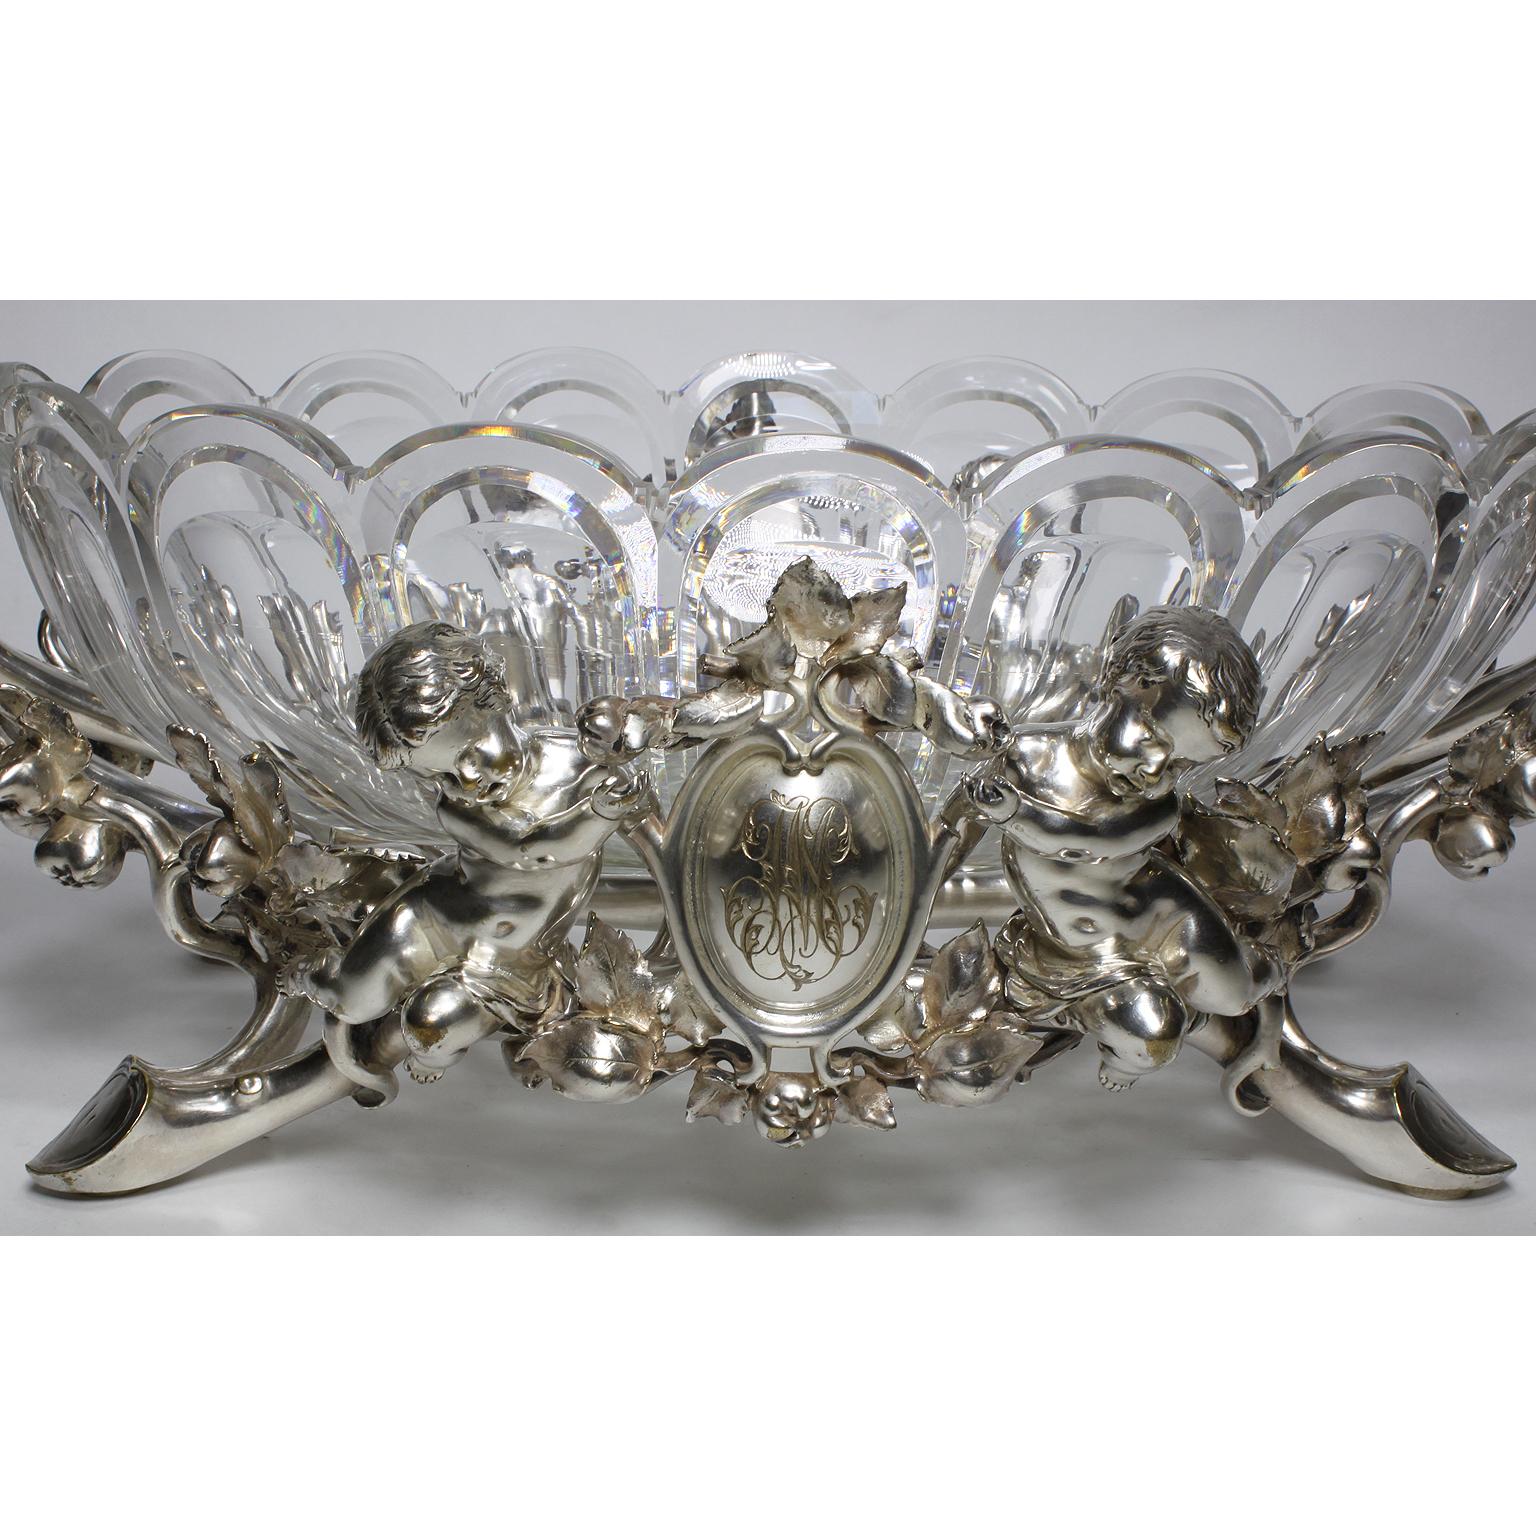 A very fine and palatial French 19th-20th century Christofle & Cie Louis XV style silvered figural centrepiece with a cut-glass scalloped centre-dish, attributed to Baccarat, and flanked by two Putti (Children), all on a pomegranate branch-form foot